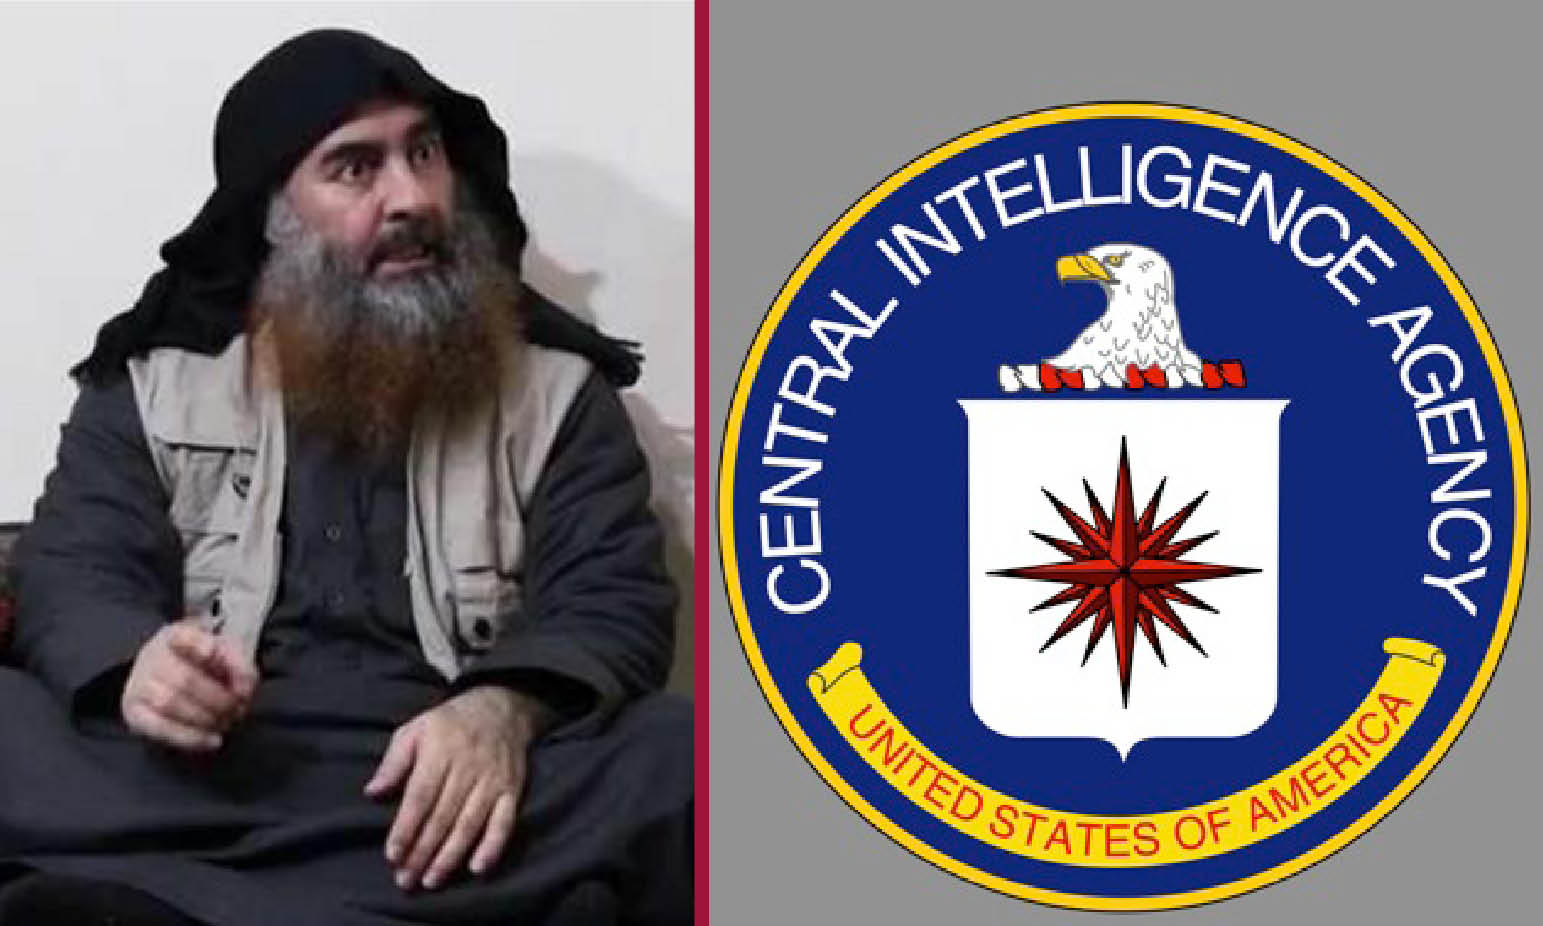 AL BAGHDADI: ISIS CALIPH AND MOSSAD-CIA AGENT HIDDEN BY US